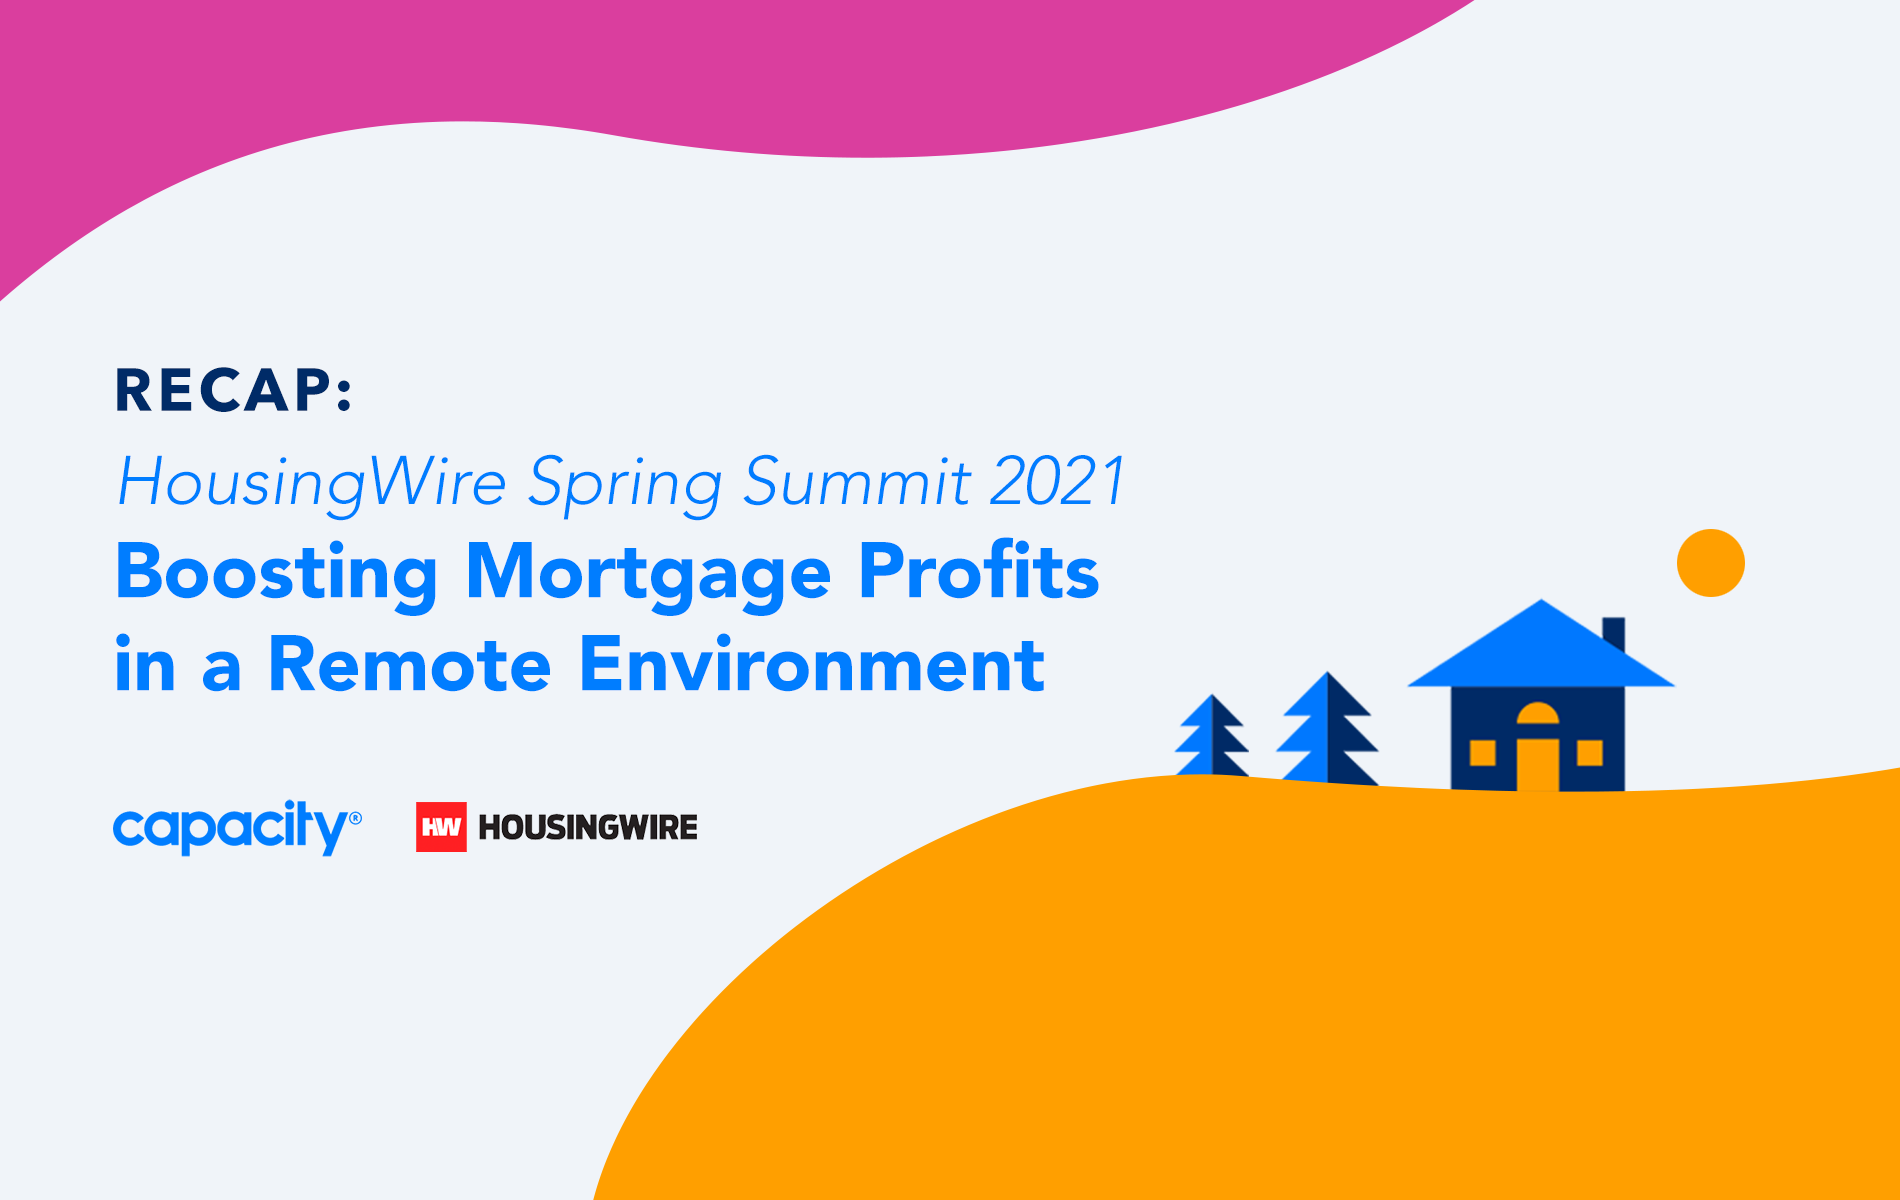 Recap: Boosting Mortgage Profits in a Remote Environment